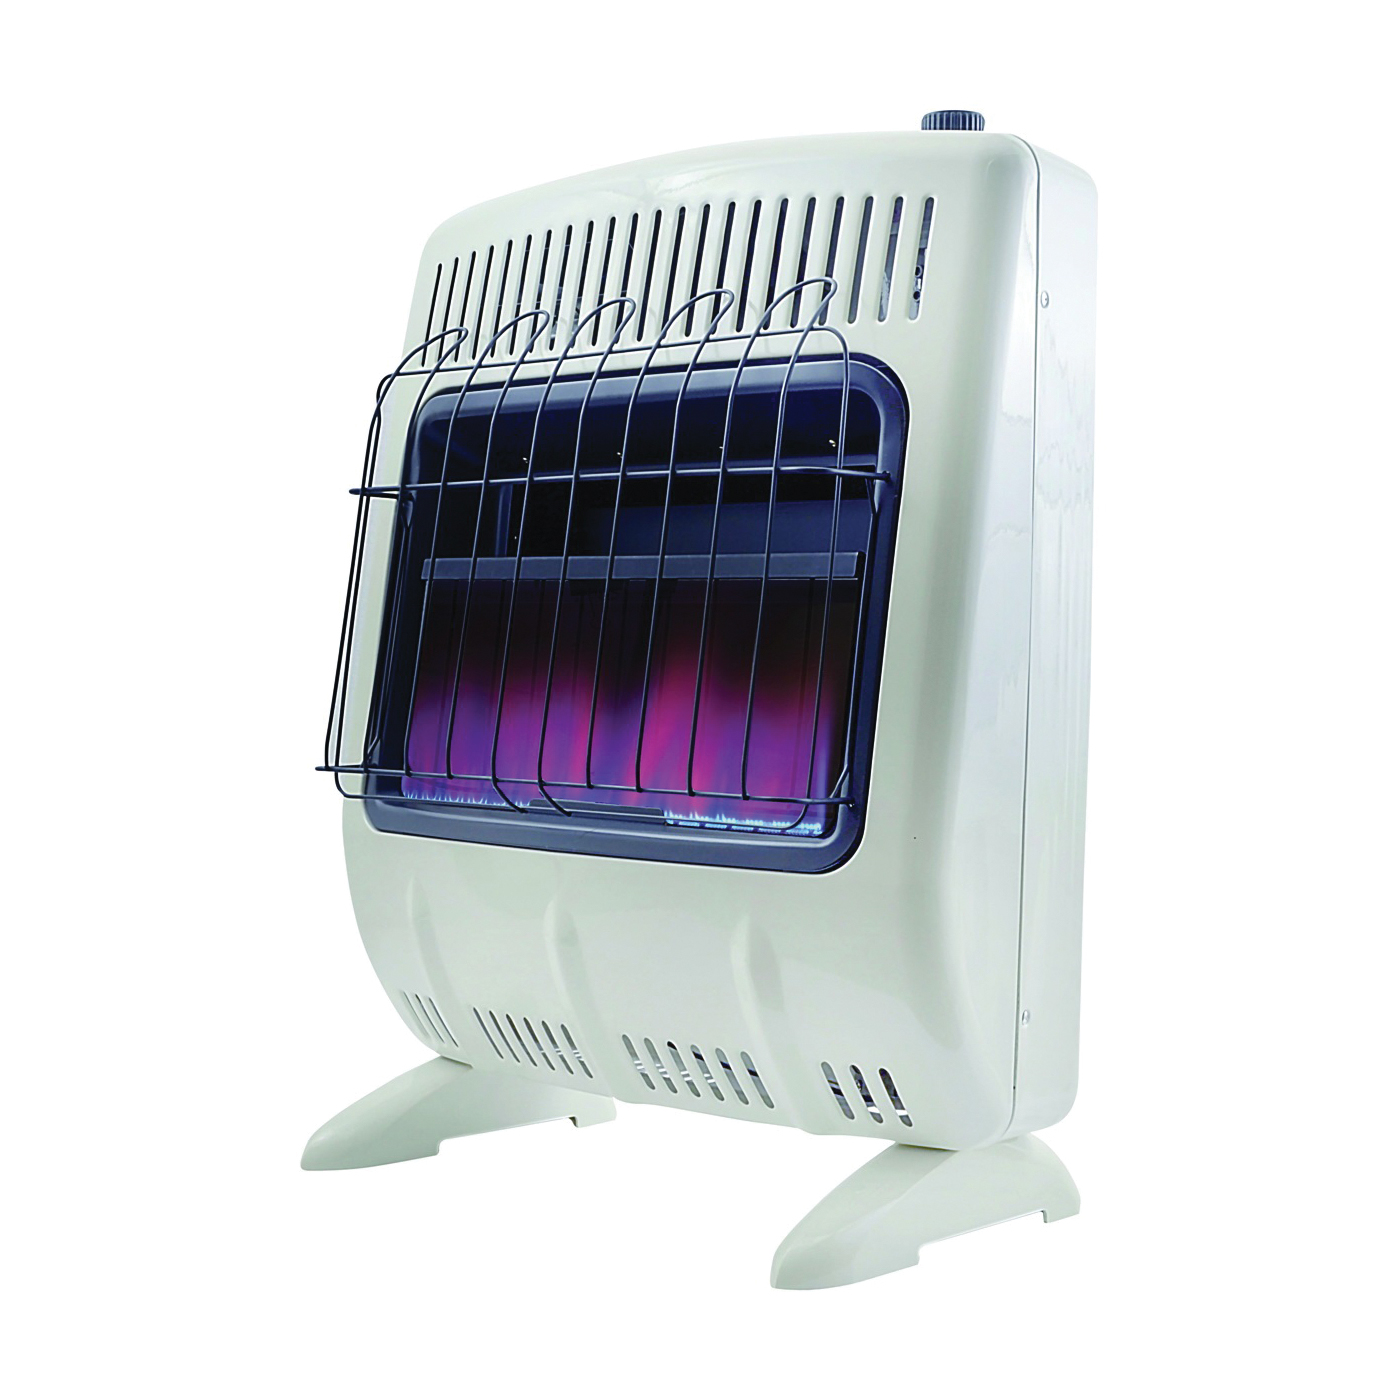 Mr. Heater F299731 Vent-Free Blue Flame Gas Heater, Natural Gas, 30000 Btu, 750 sq-ft Heating Area